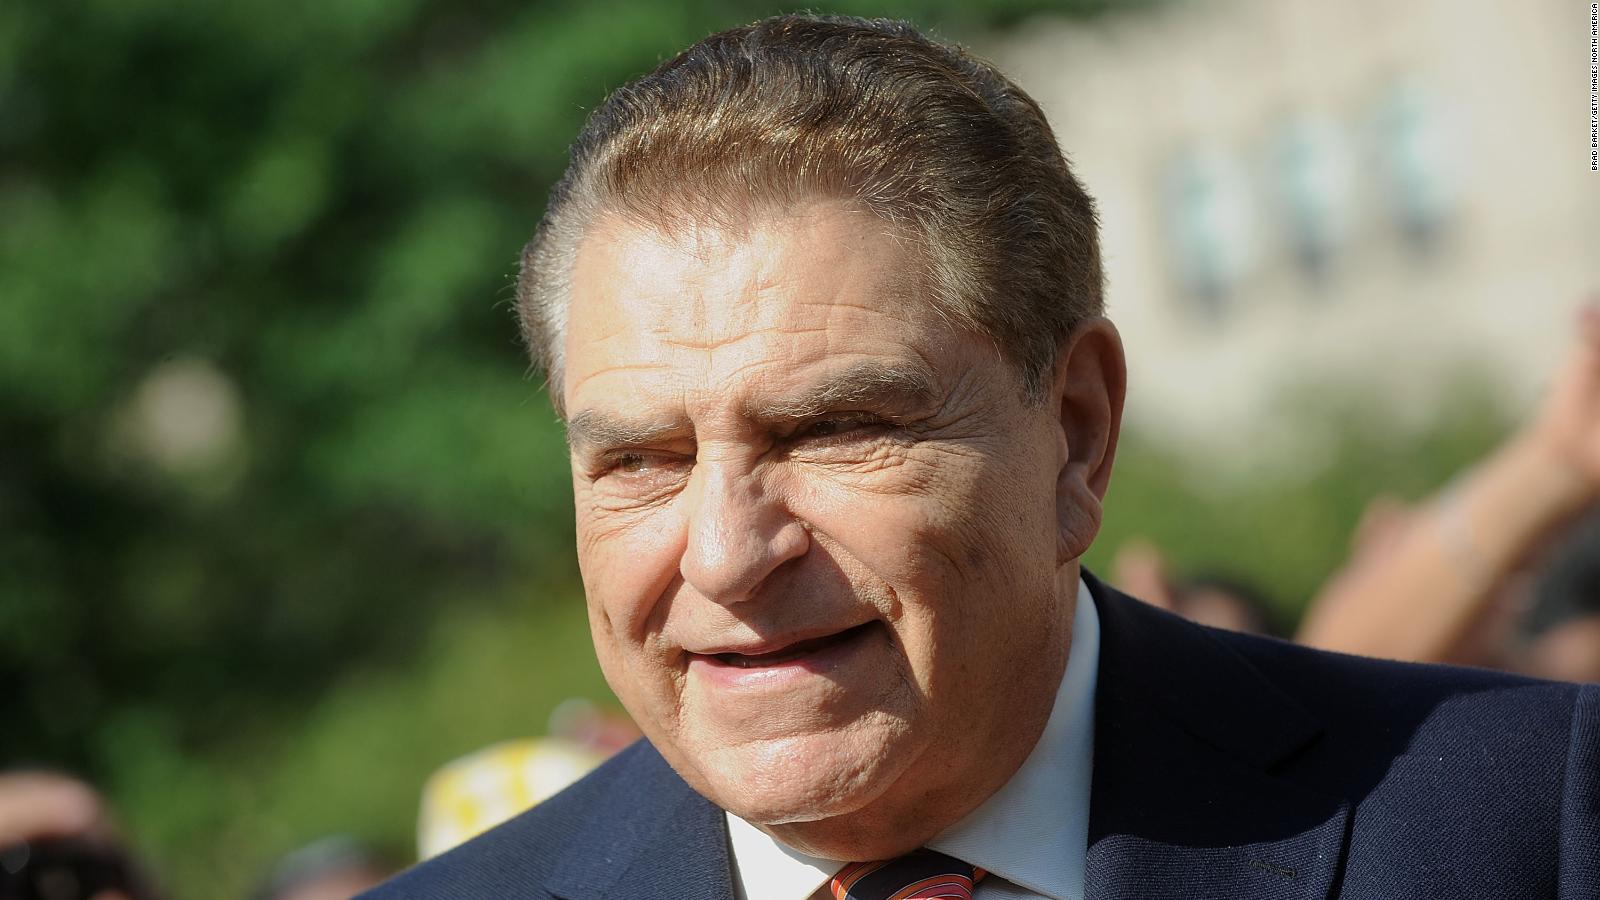 Don Francisco and his relationship with the family |  Video